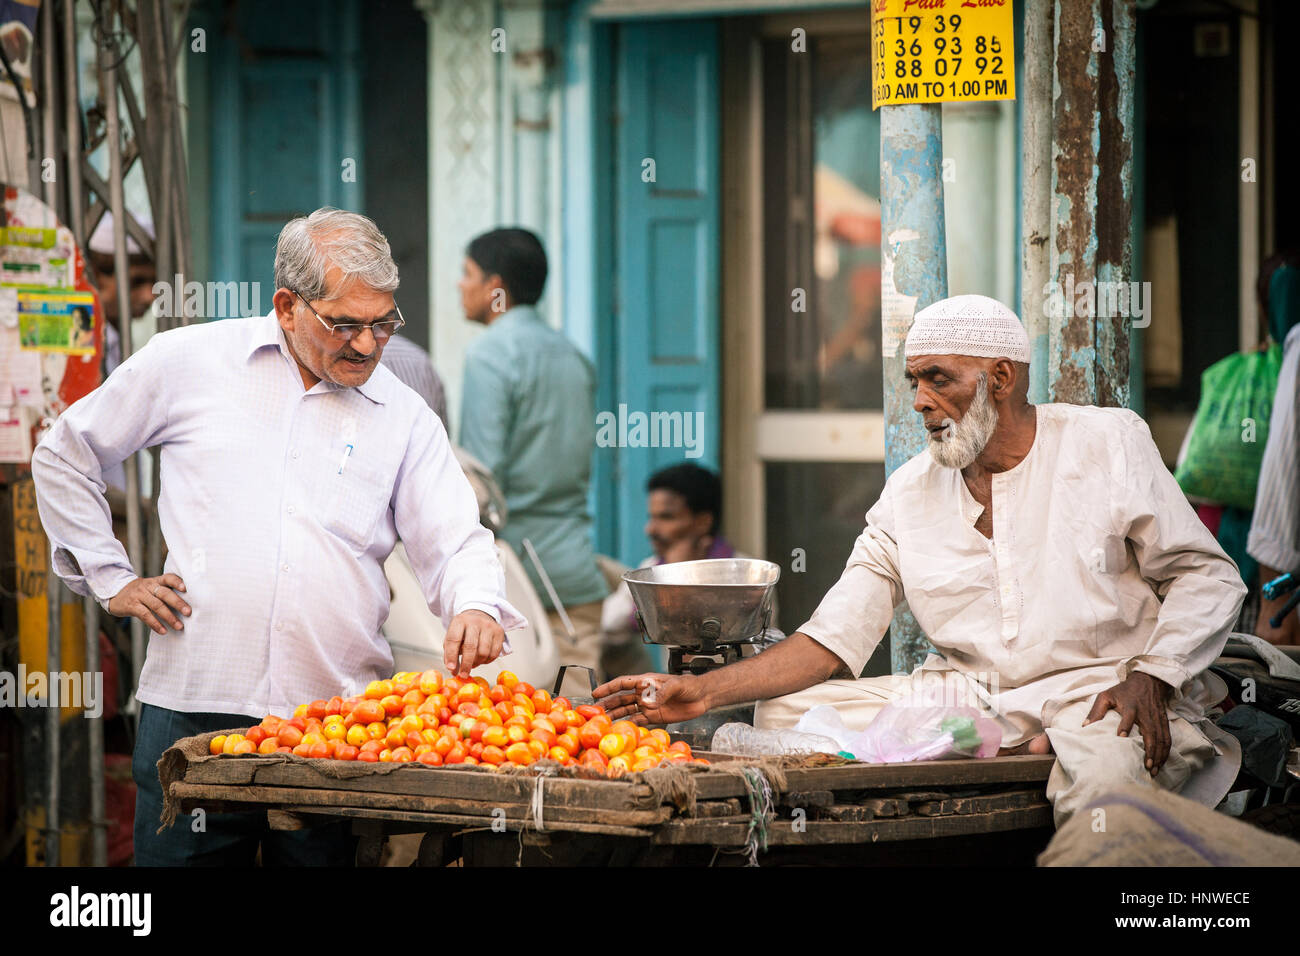 Delhi, India - September 18, 2014: Indian man buying tomatoes from muslim vendor on the street of Old Delhi, India on September 18, 2014. Stock Photo